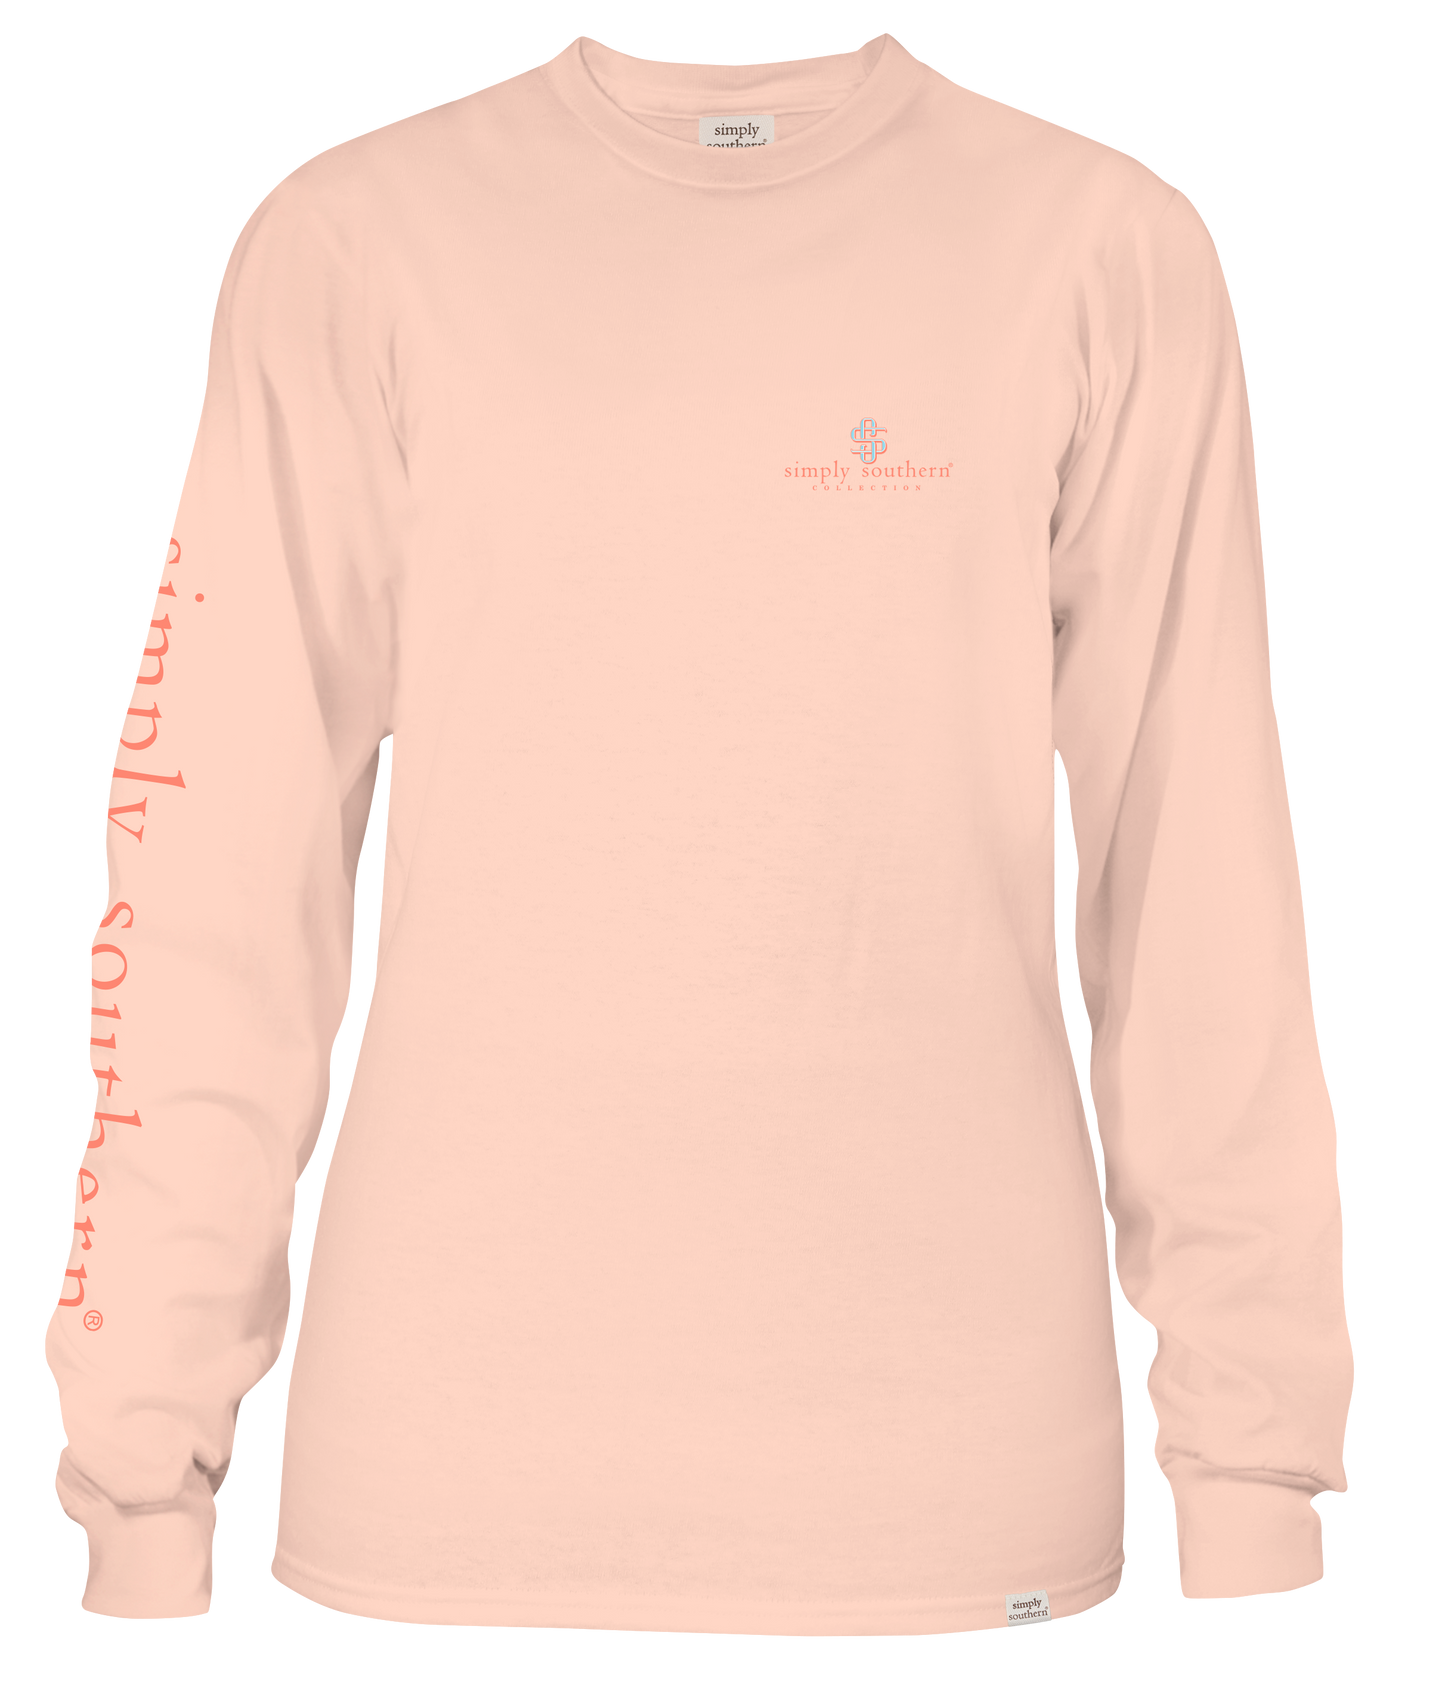 Girls Youth Different Long Sleeve T-Shirt